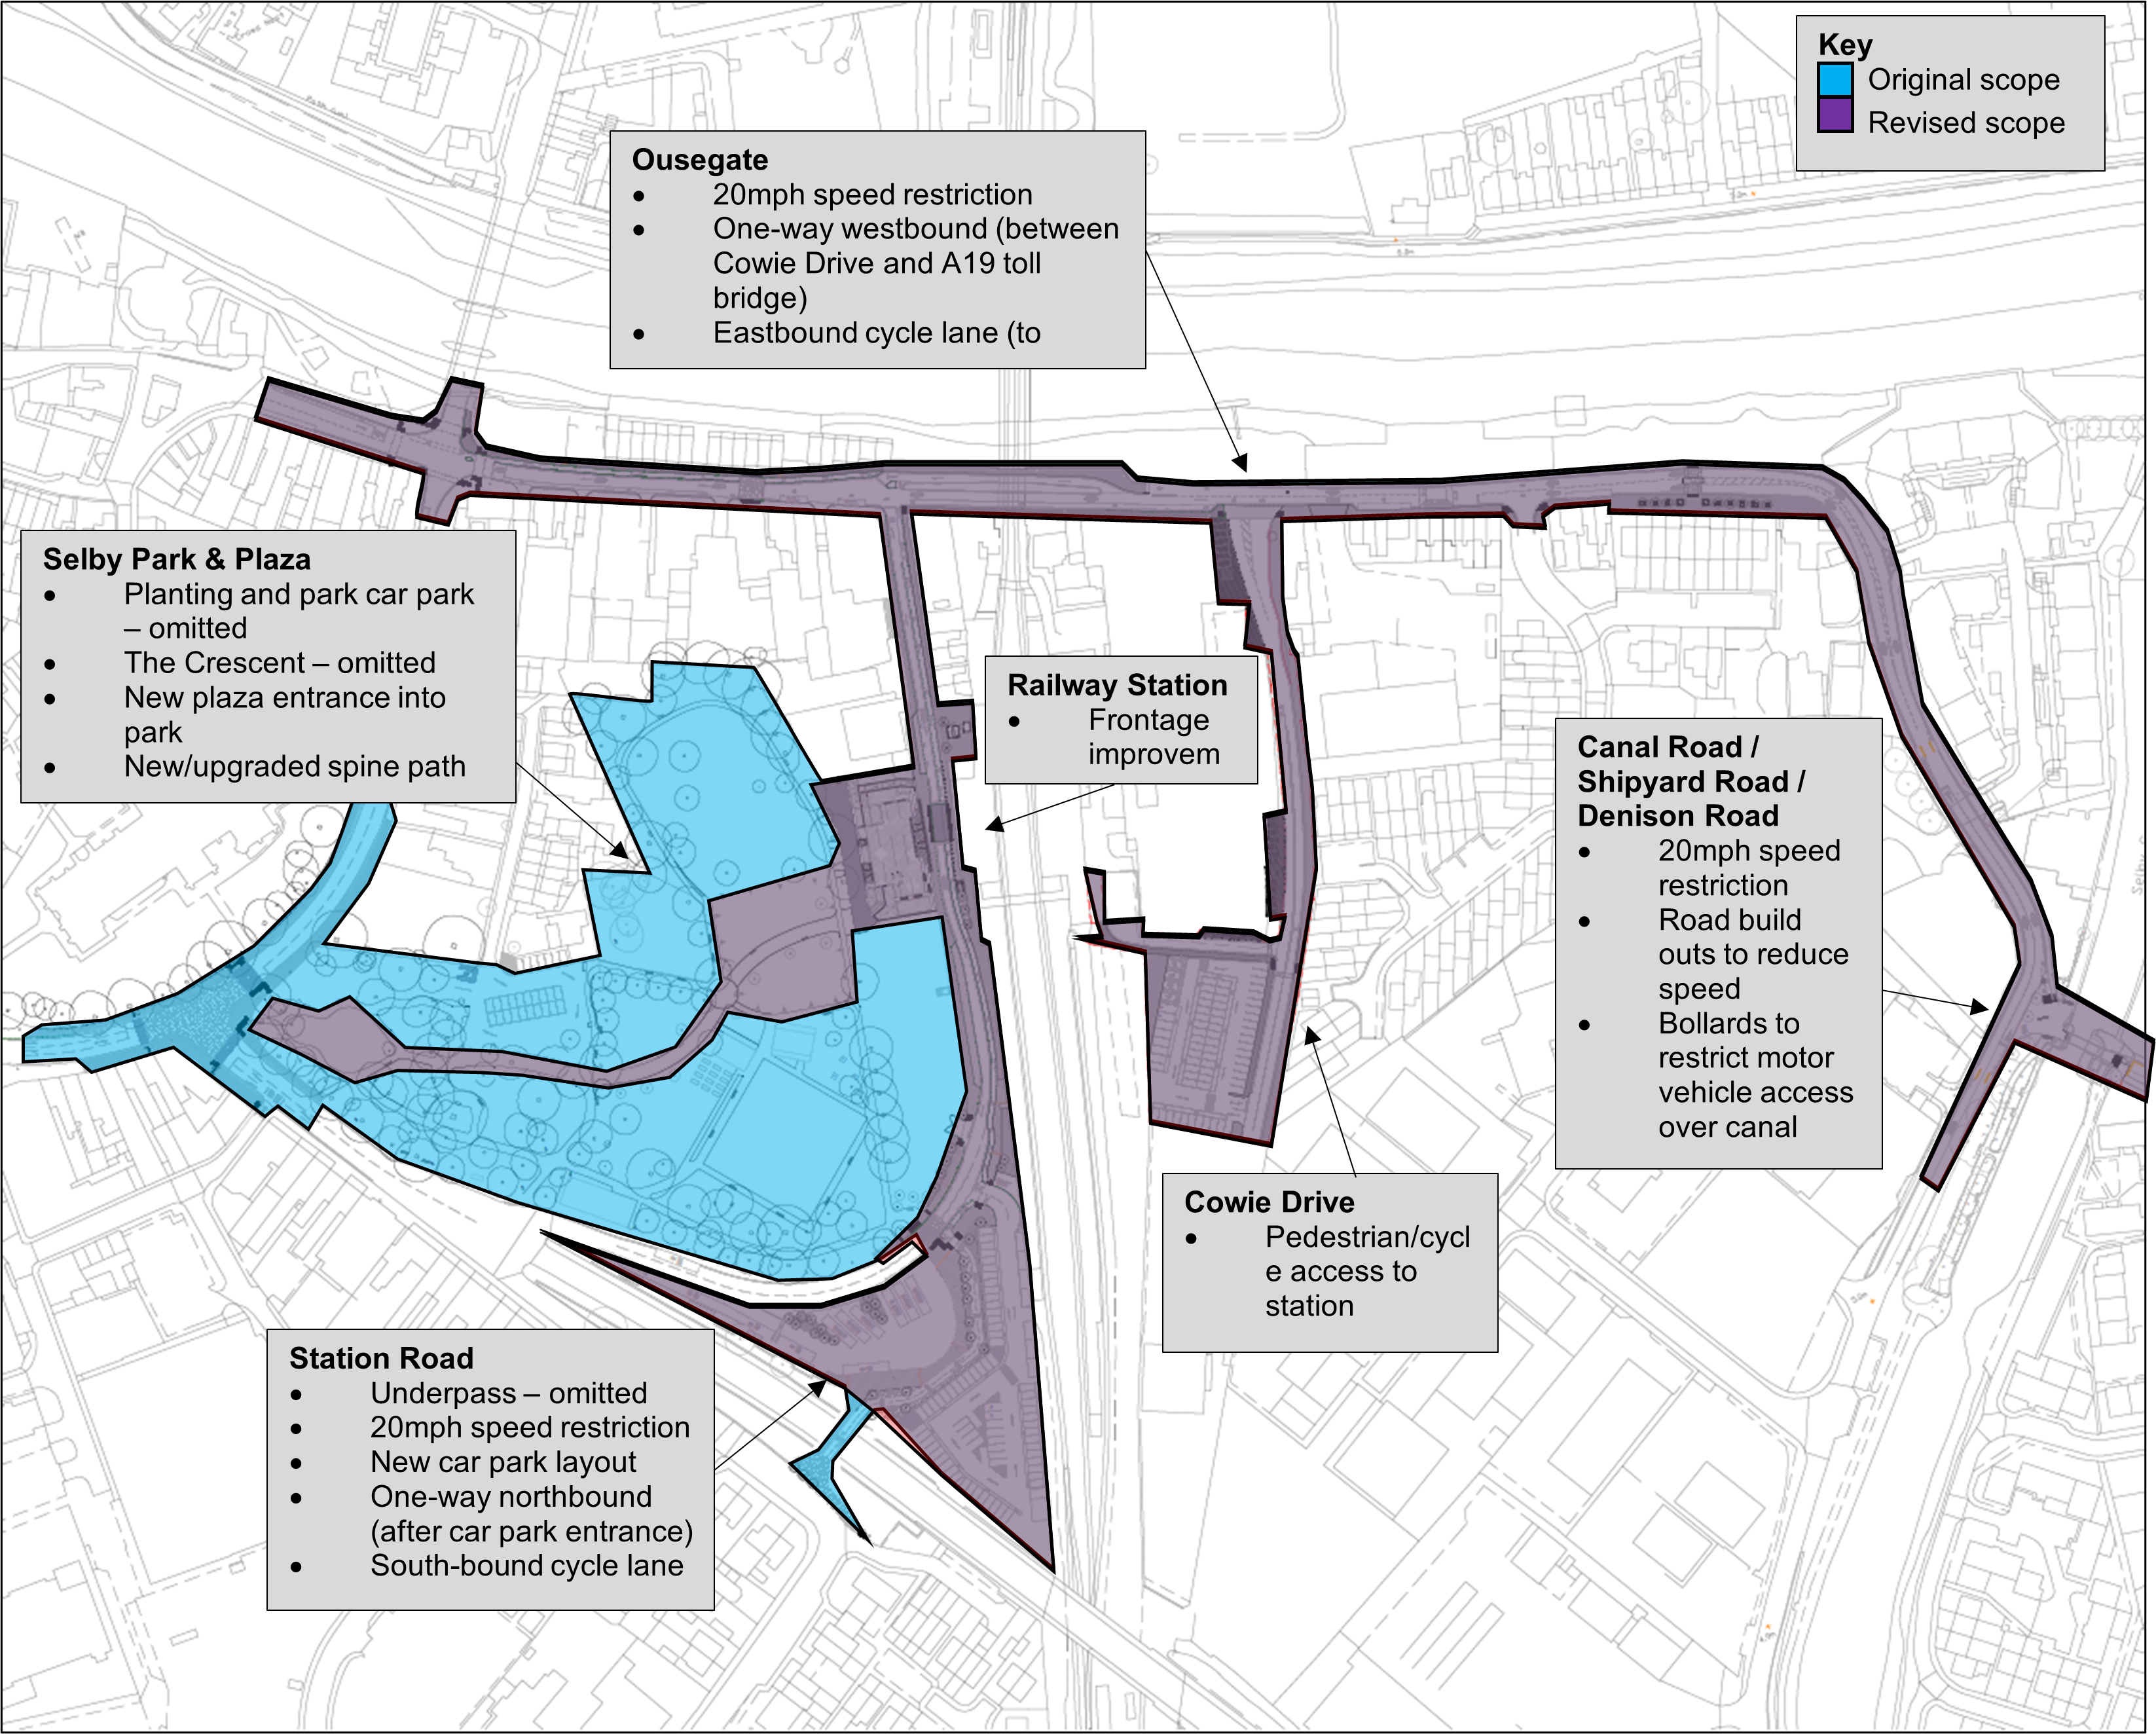 A map of Selby town centre showing the scope of the original Transforming Cities Fund scheme with the revised scope overlaid. Contact us to view in an accessible format.